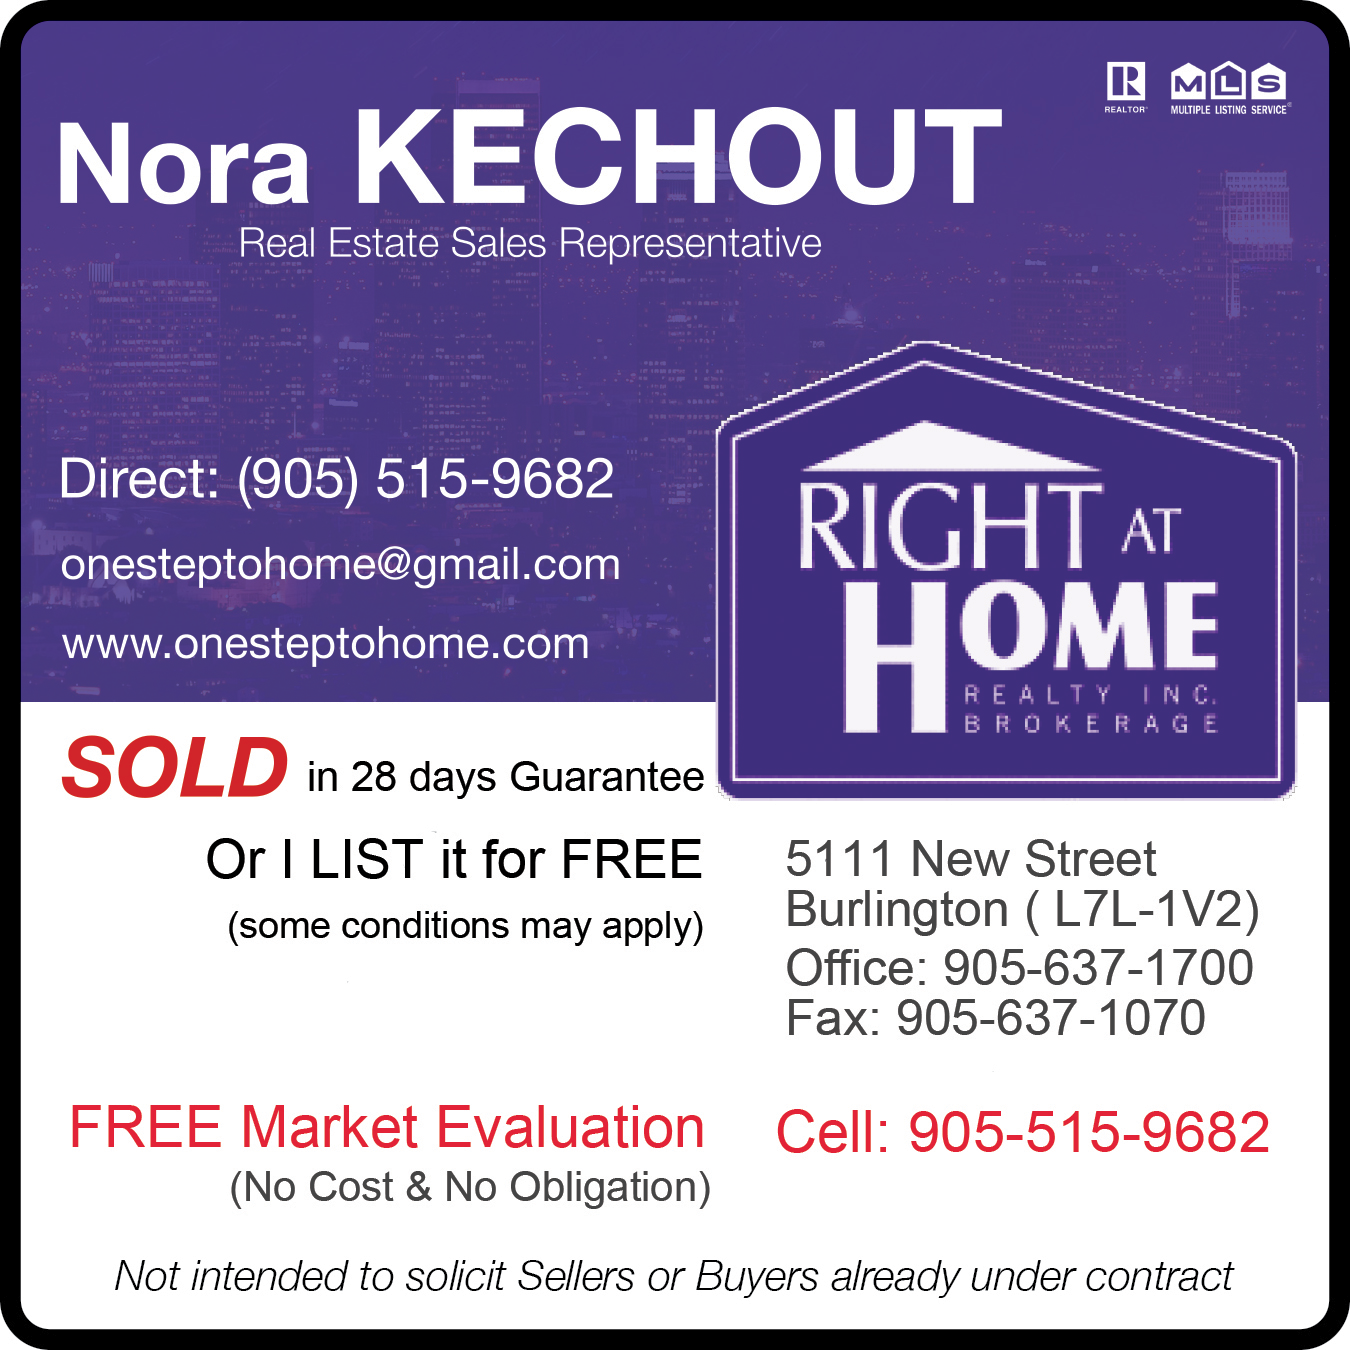 RIGHT AT HOME REALTY